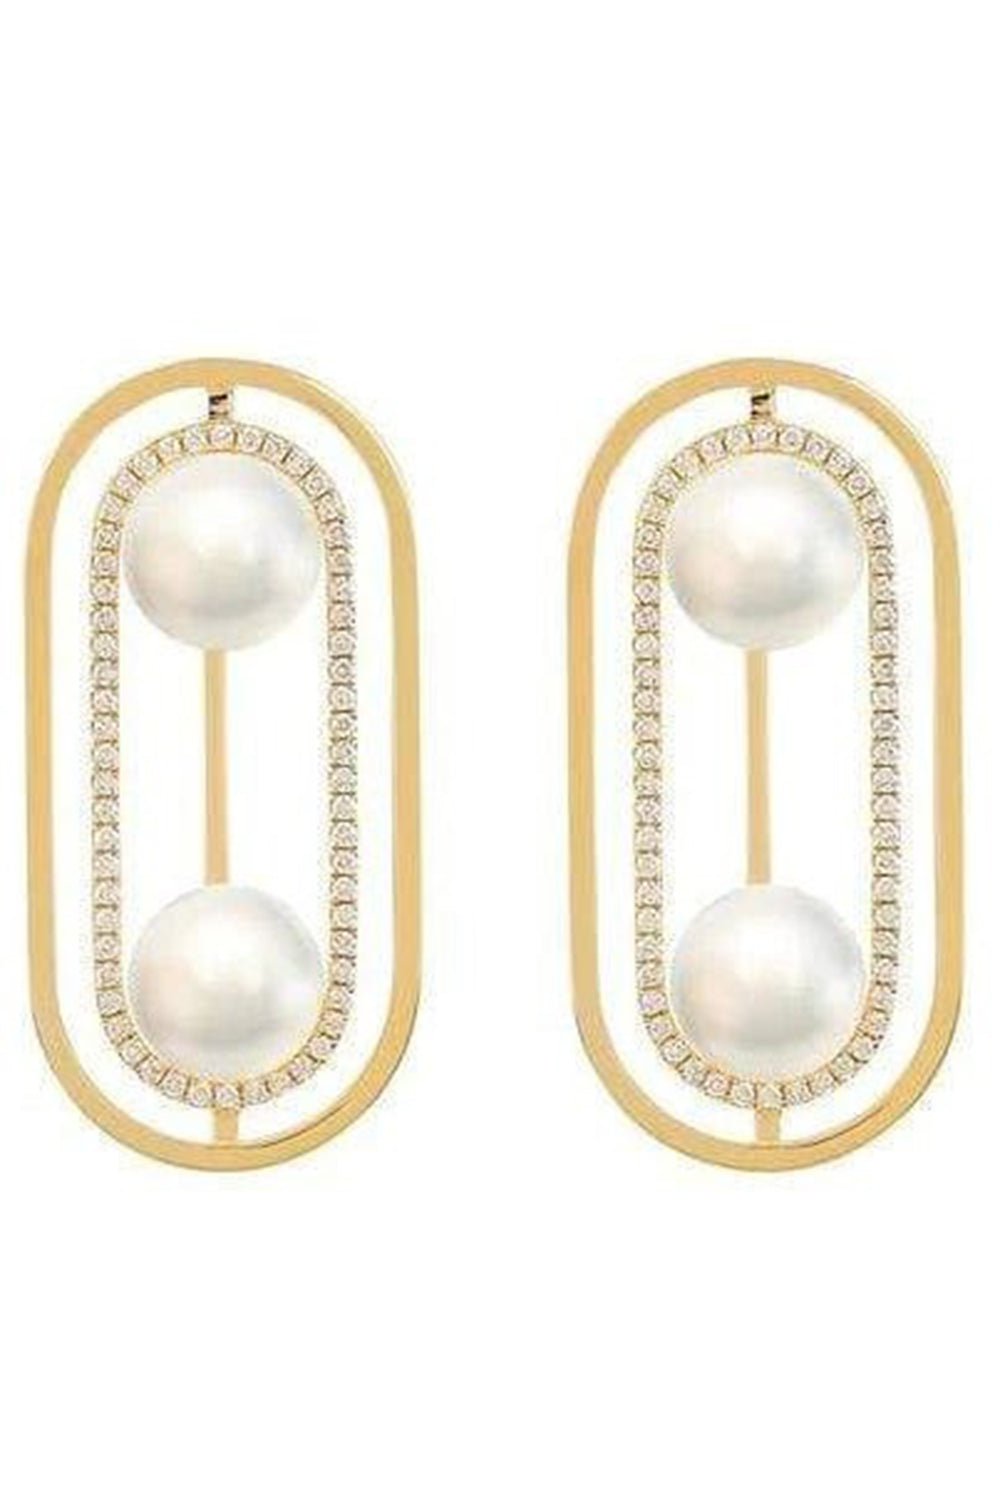 STATE PROPERTY-Ellipsis Pearl and Diamond Earrings-YELLOW GOLD